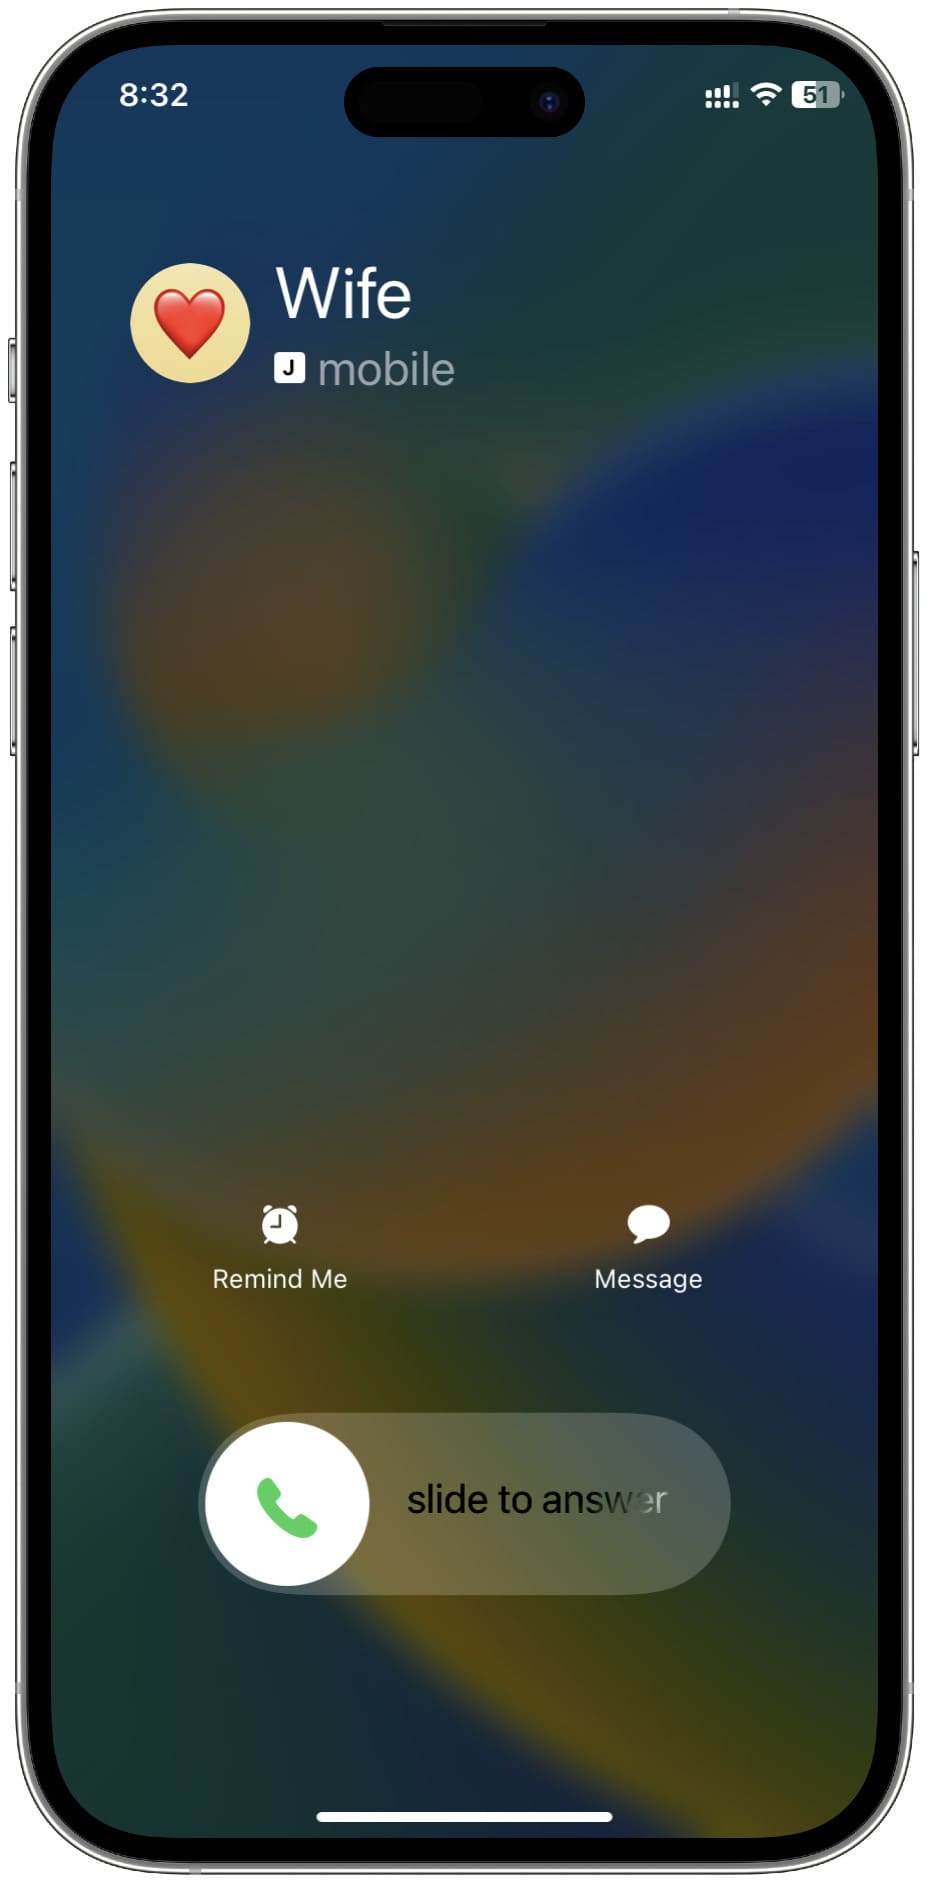 Call on iPhone Lock Screen showing the slide to answer interface